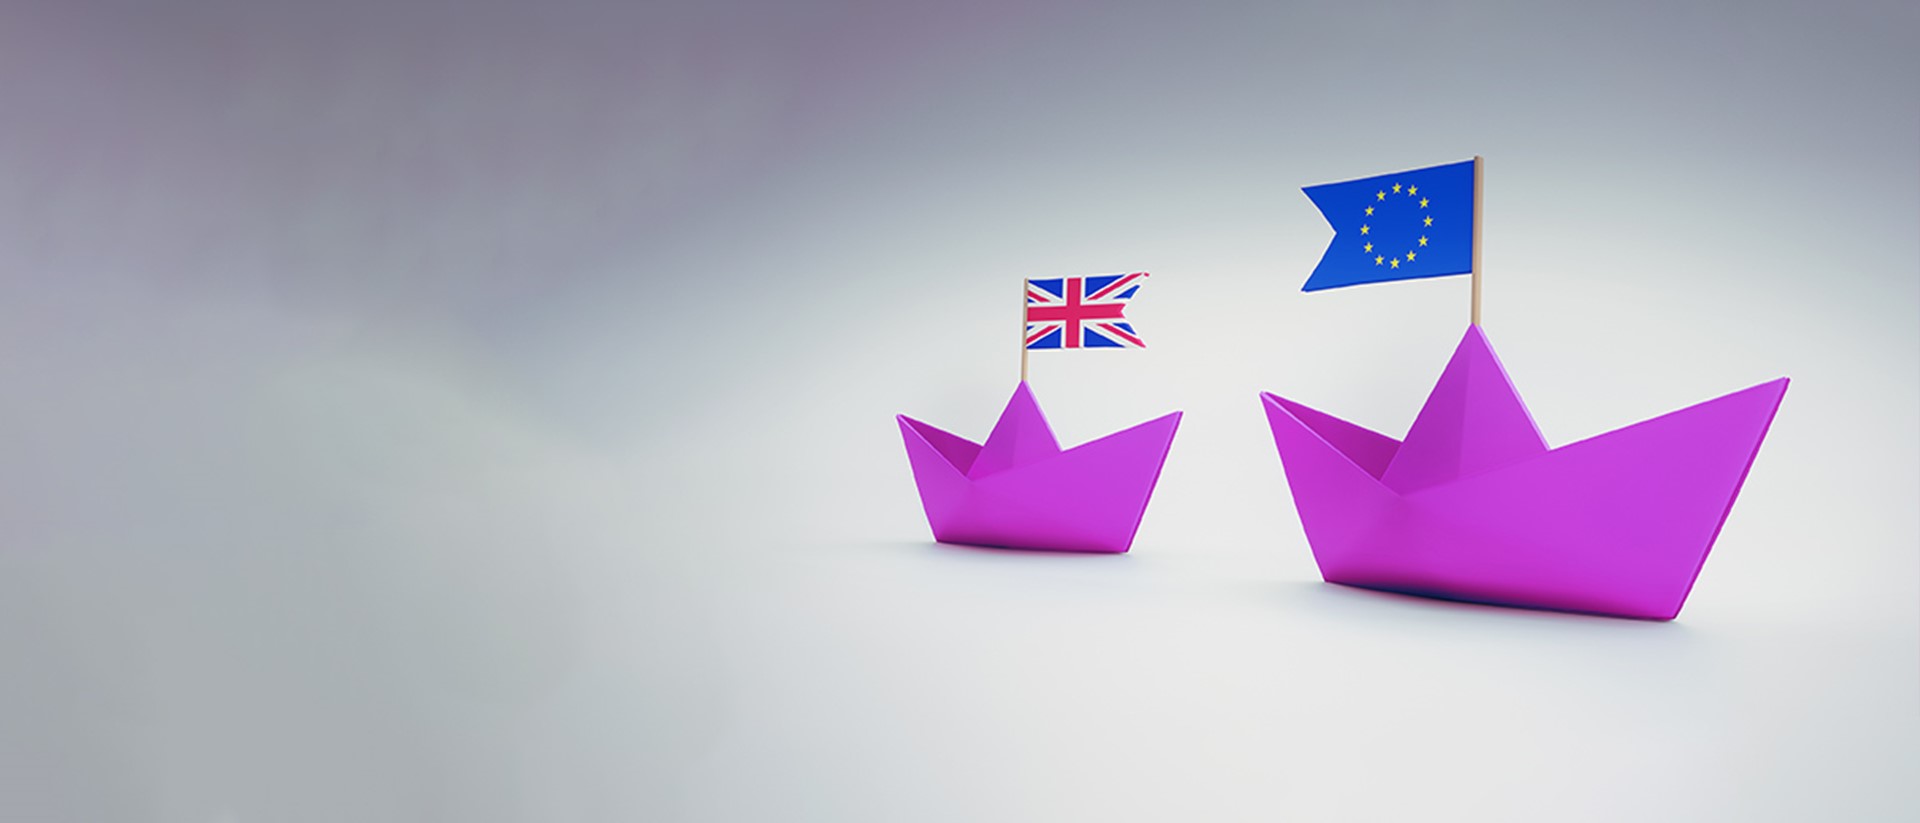 Image of purple paper boats with a union jack flag on one and the European flag in the other